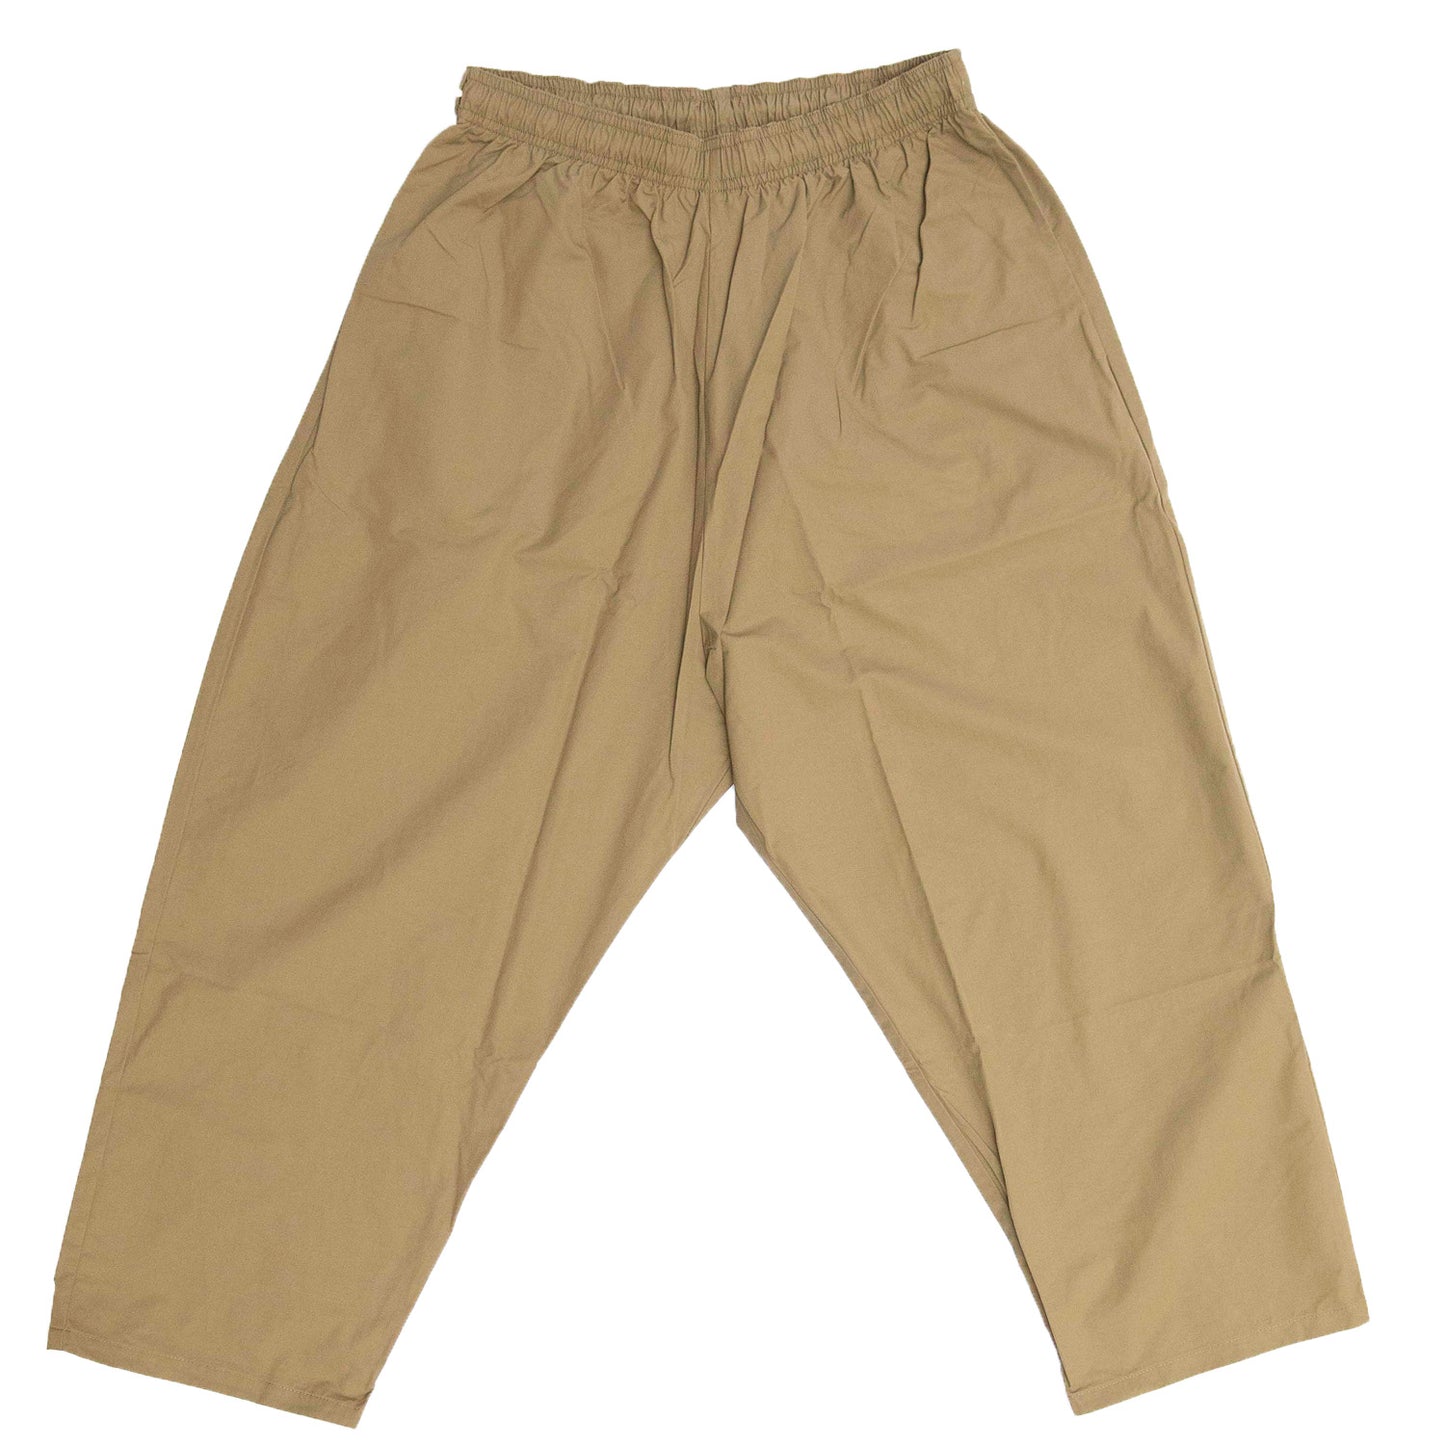 Weather Cloth Sunday Pants (VOIRY)